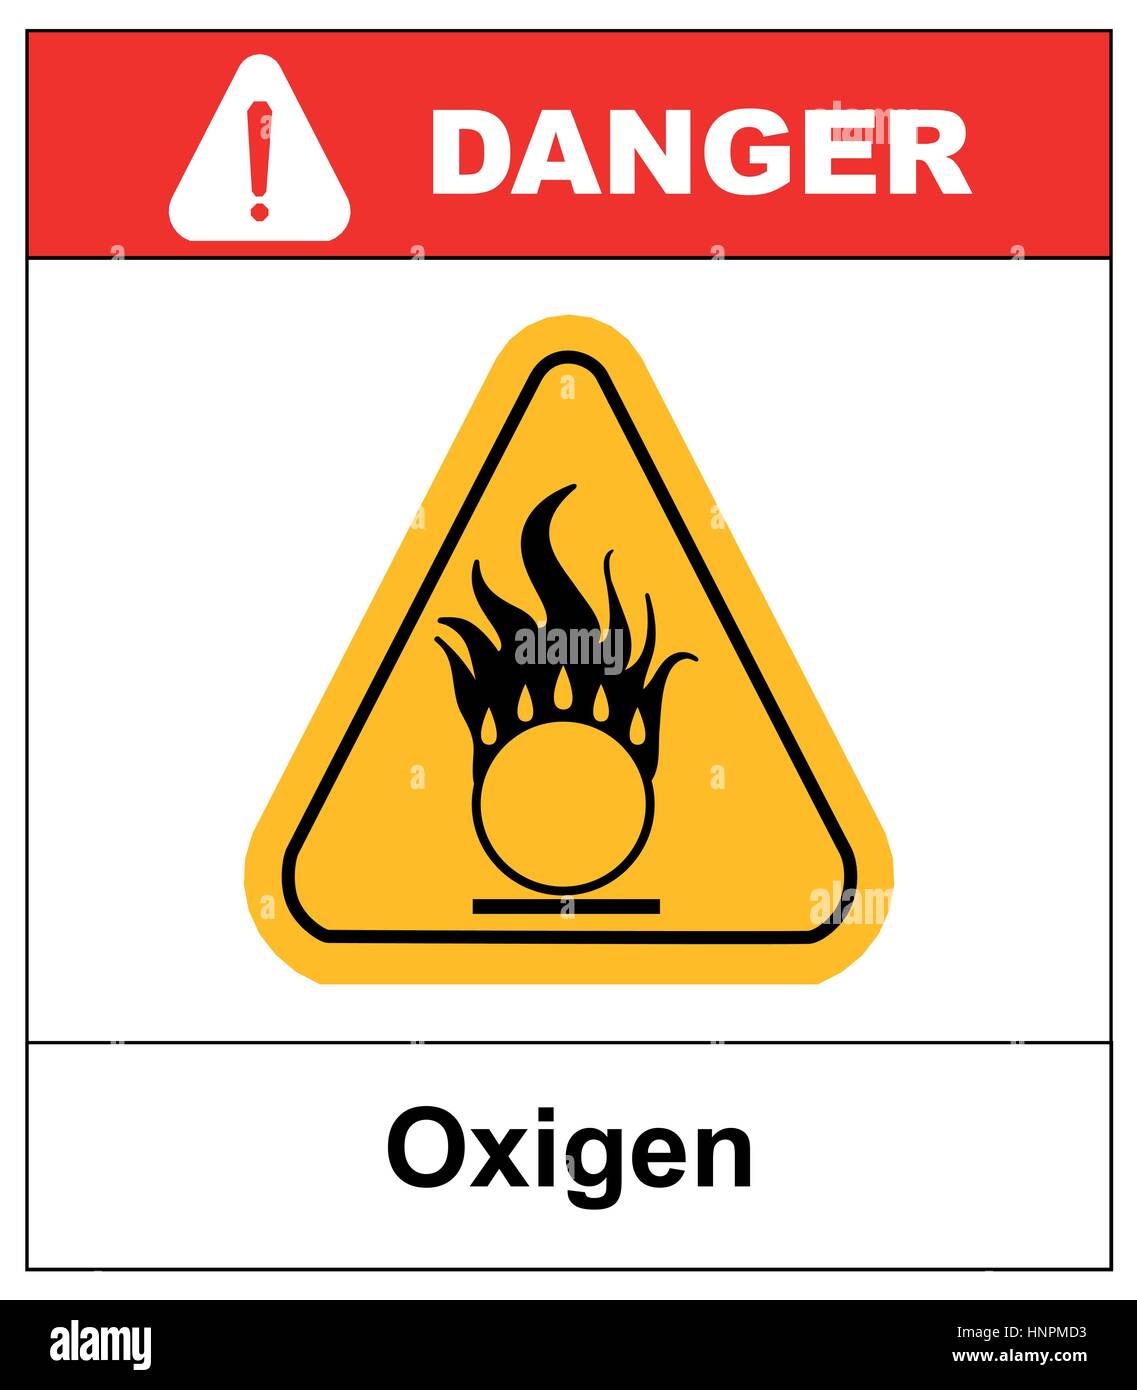 Oxidizing warning symbol in yellow triangle Information sticker for public places Vector illustration Danger banner Stock Vector